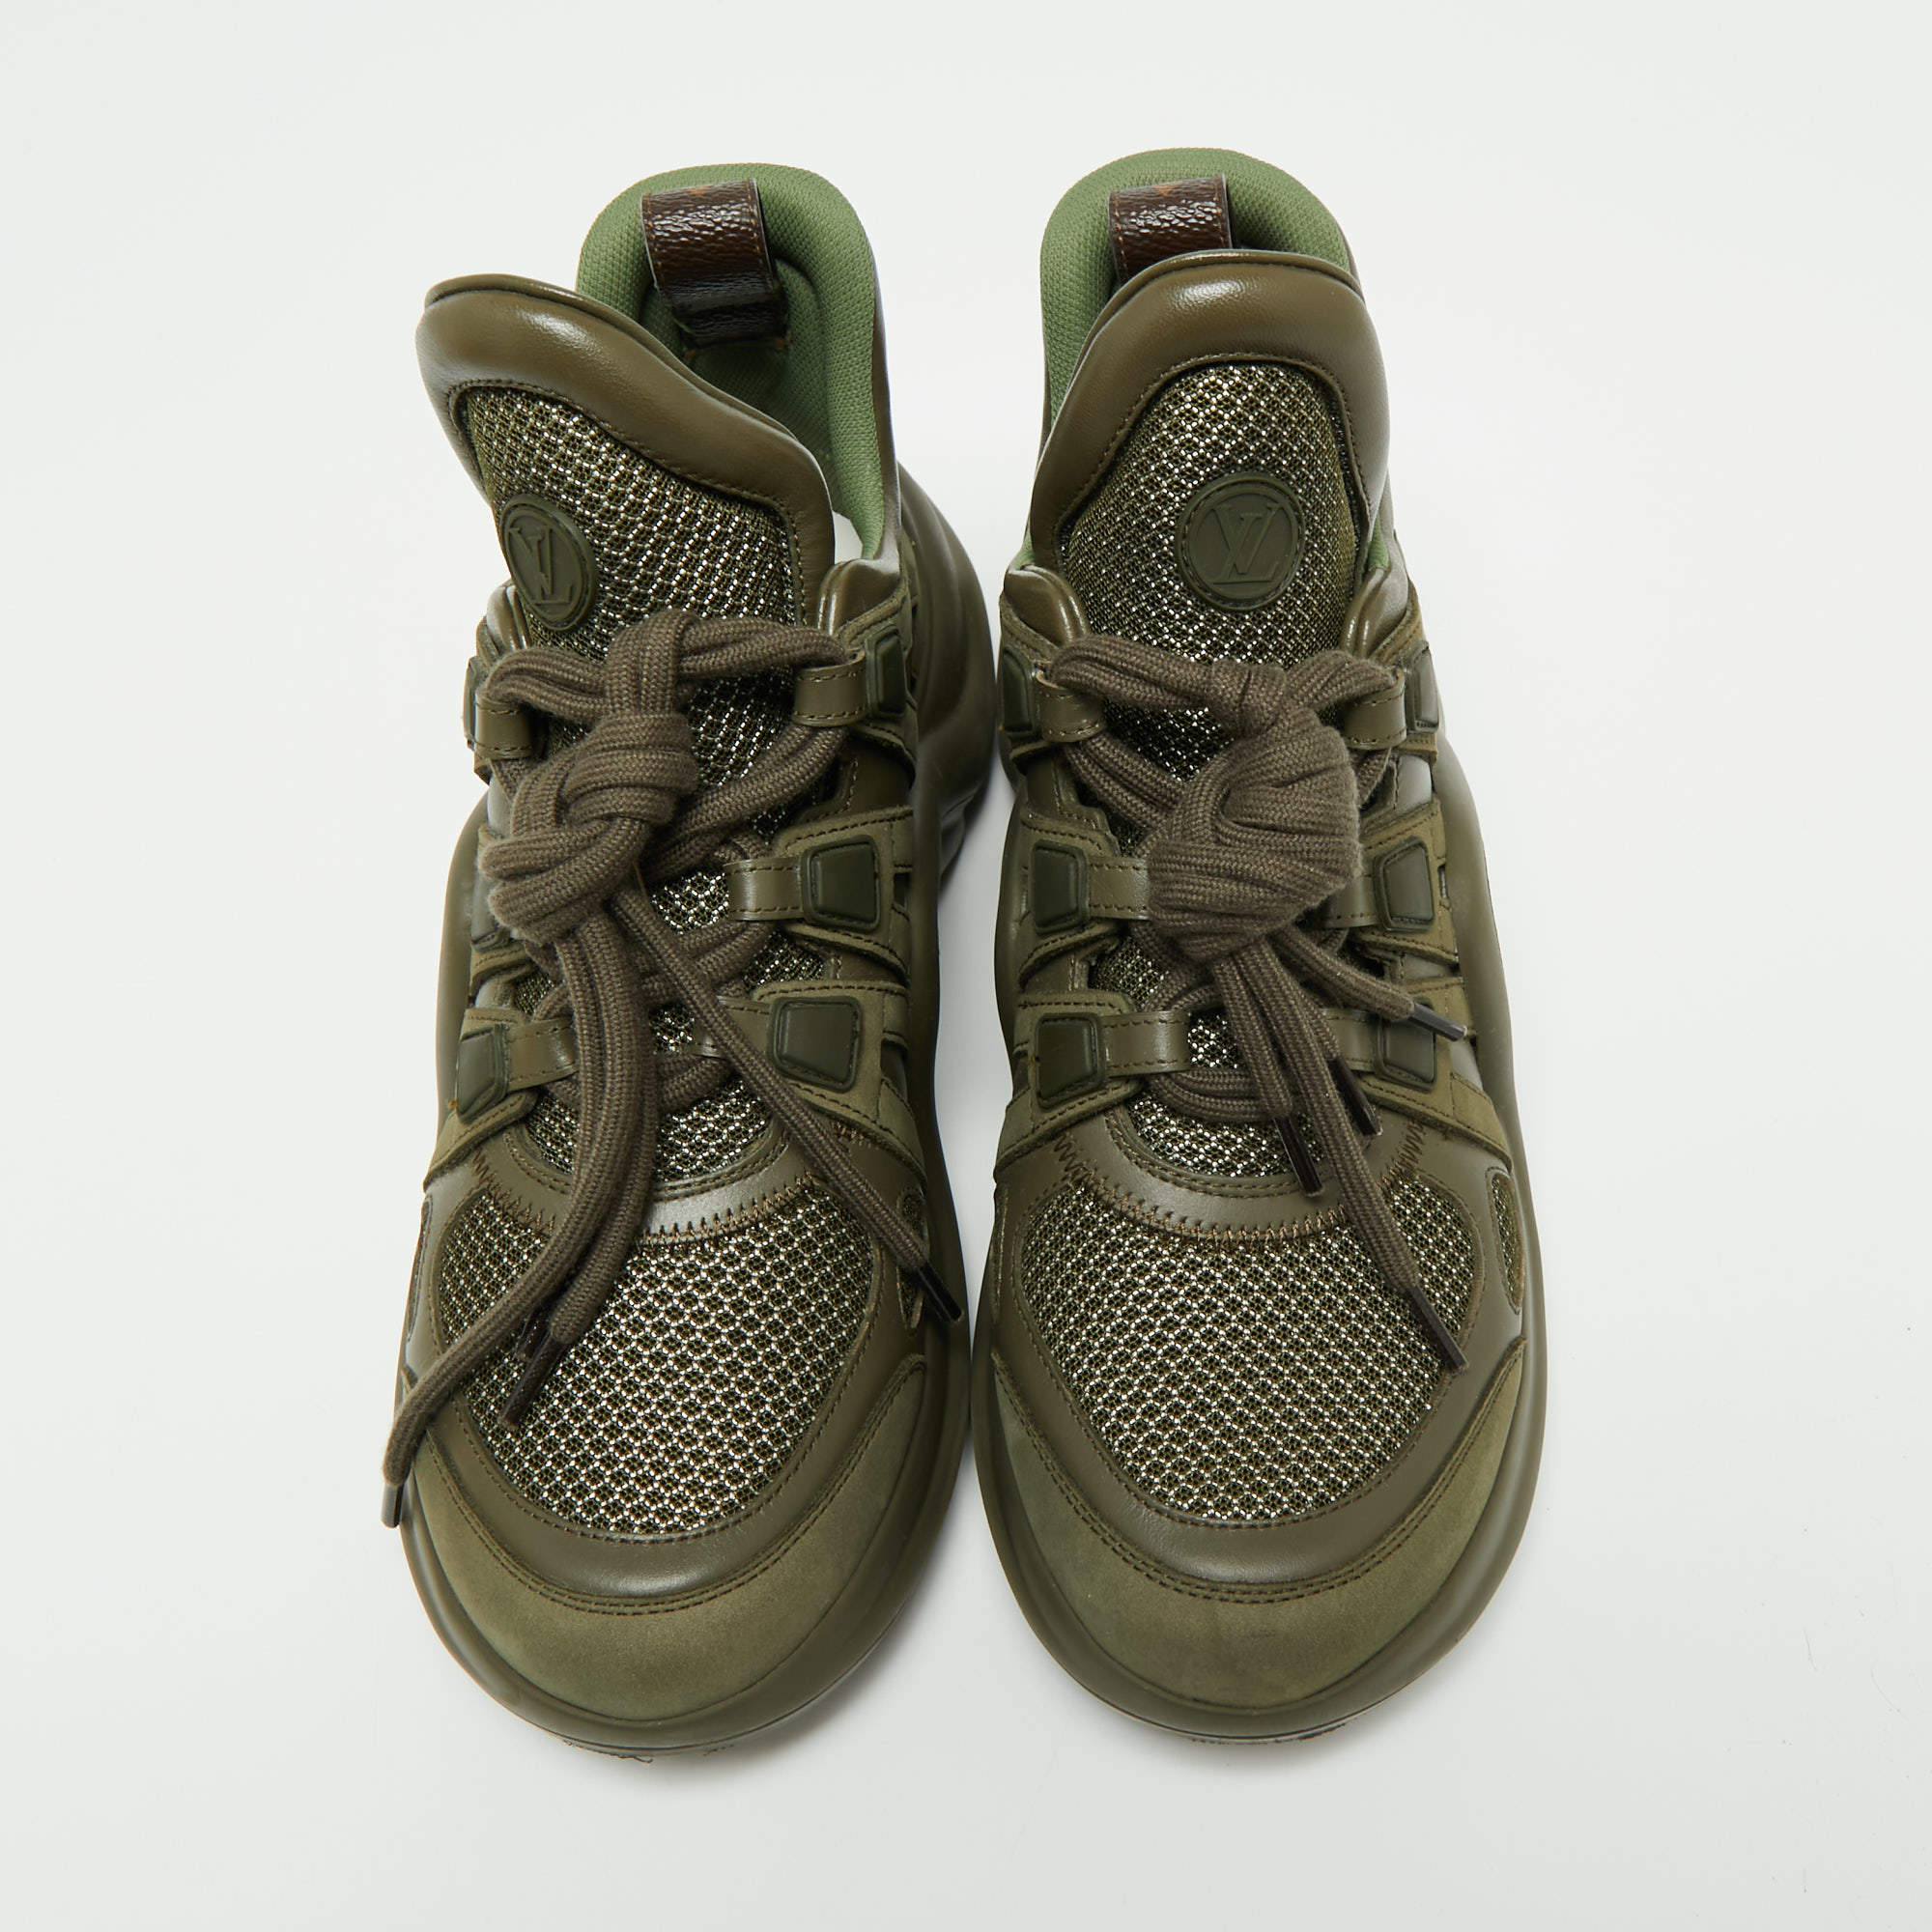 Louis Vuitton, Shoes, Arch Louis Vuitton Sneakers Size 39 True To Size  Olive Green Brand Newdust Bags